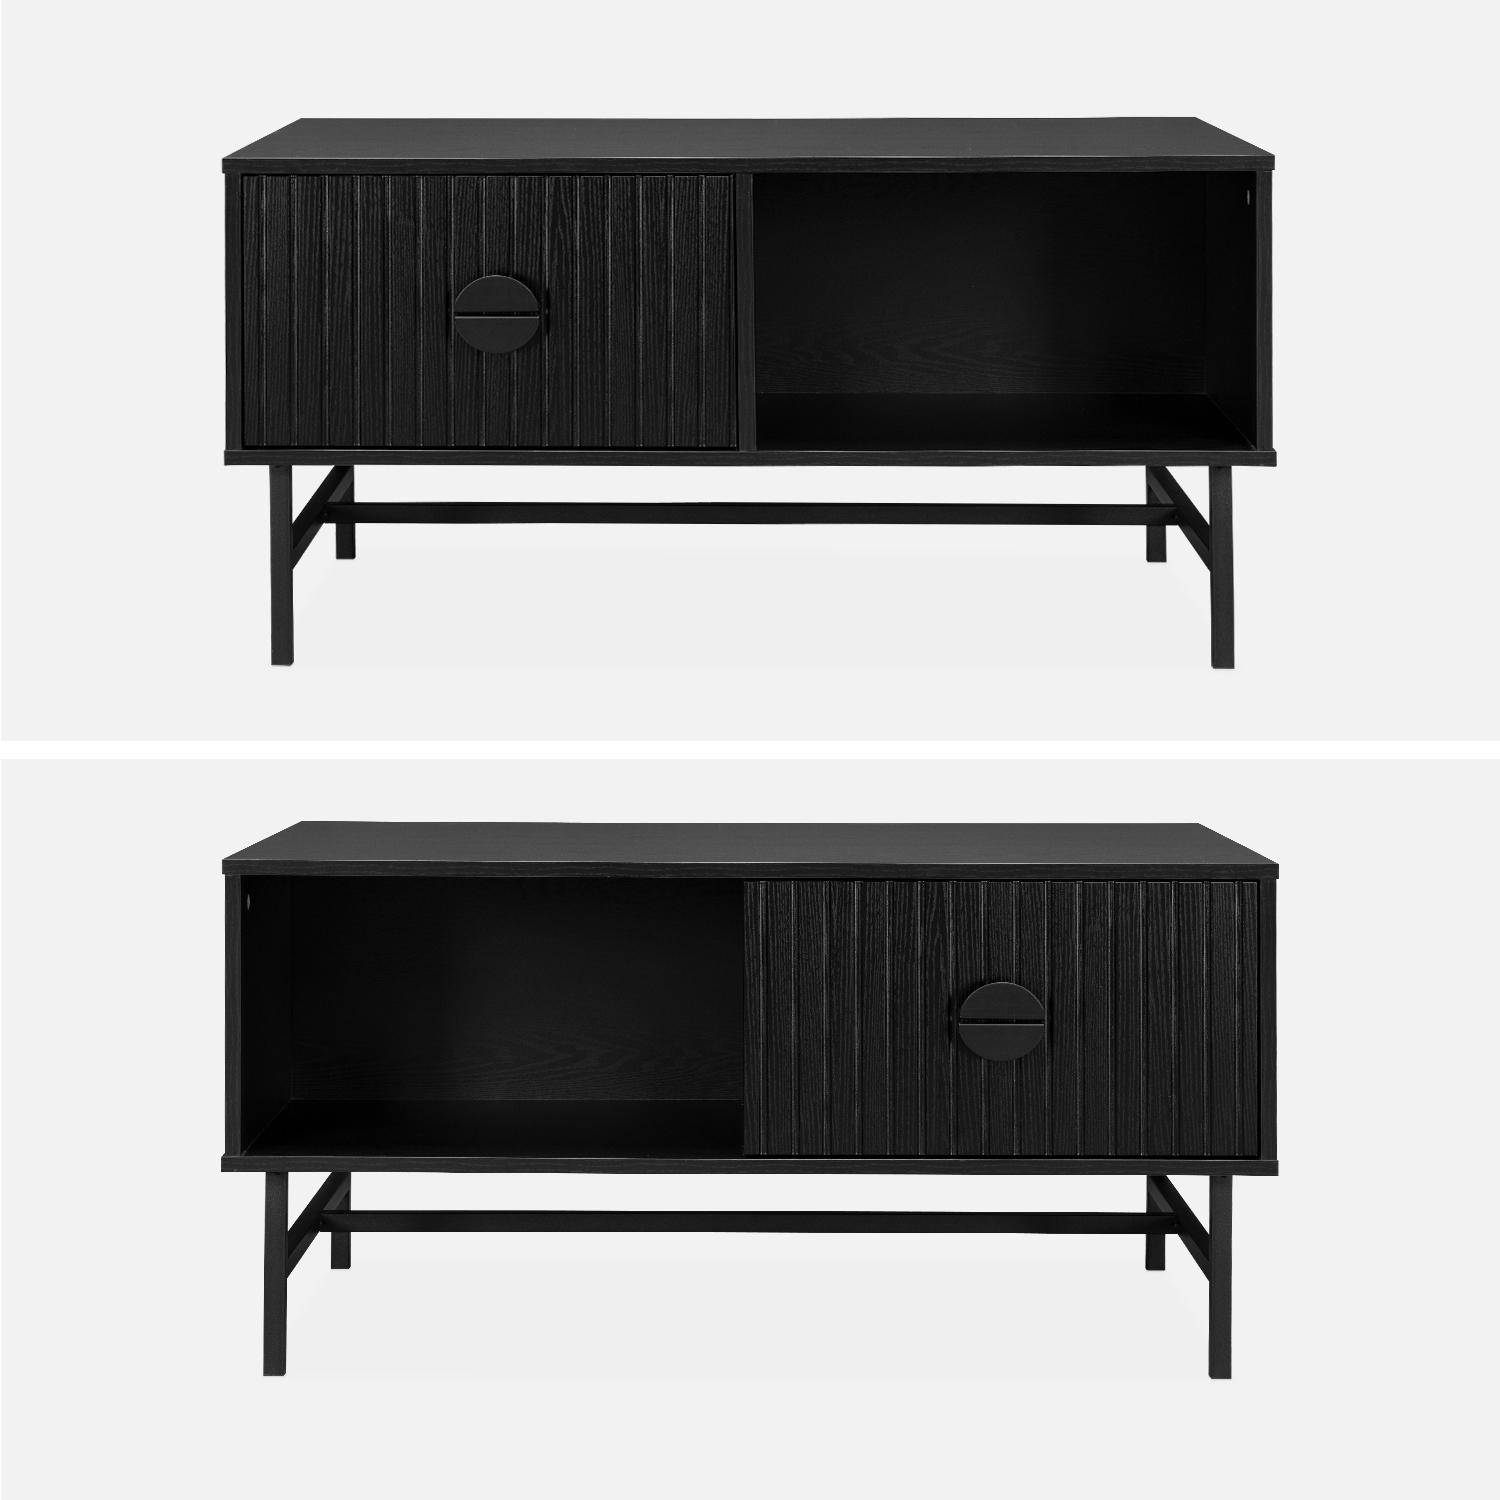 Coffee table with one drawer and one storage nook, ridged effect, industrial style, 100x59x50.2cm - Bazalt - Black Photo5